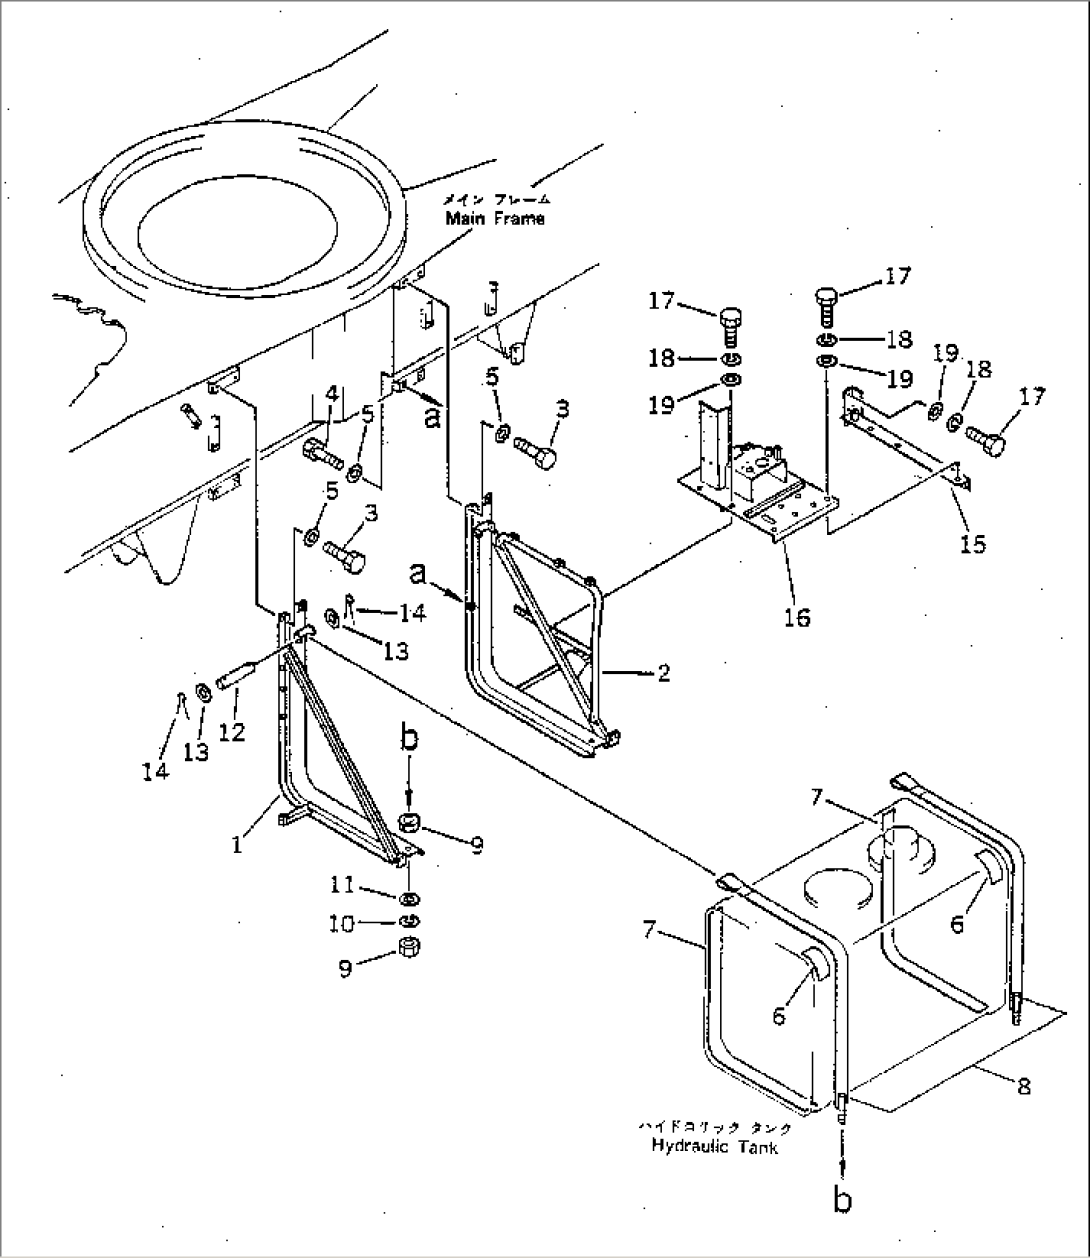 HYDRAULIC TANK MOUNTING BRACKET (FOR H-TYPE OUTRIGGER)